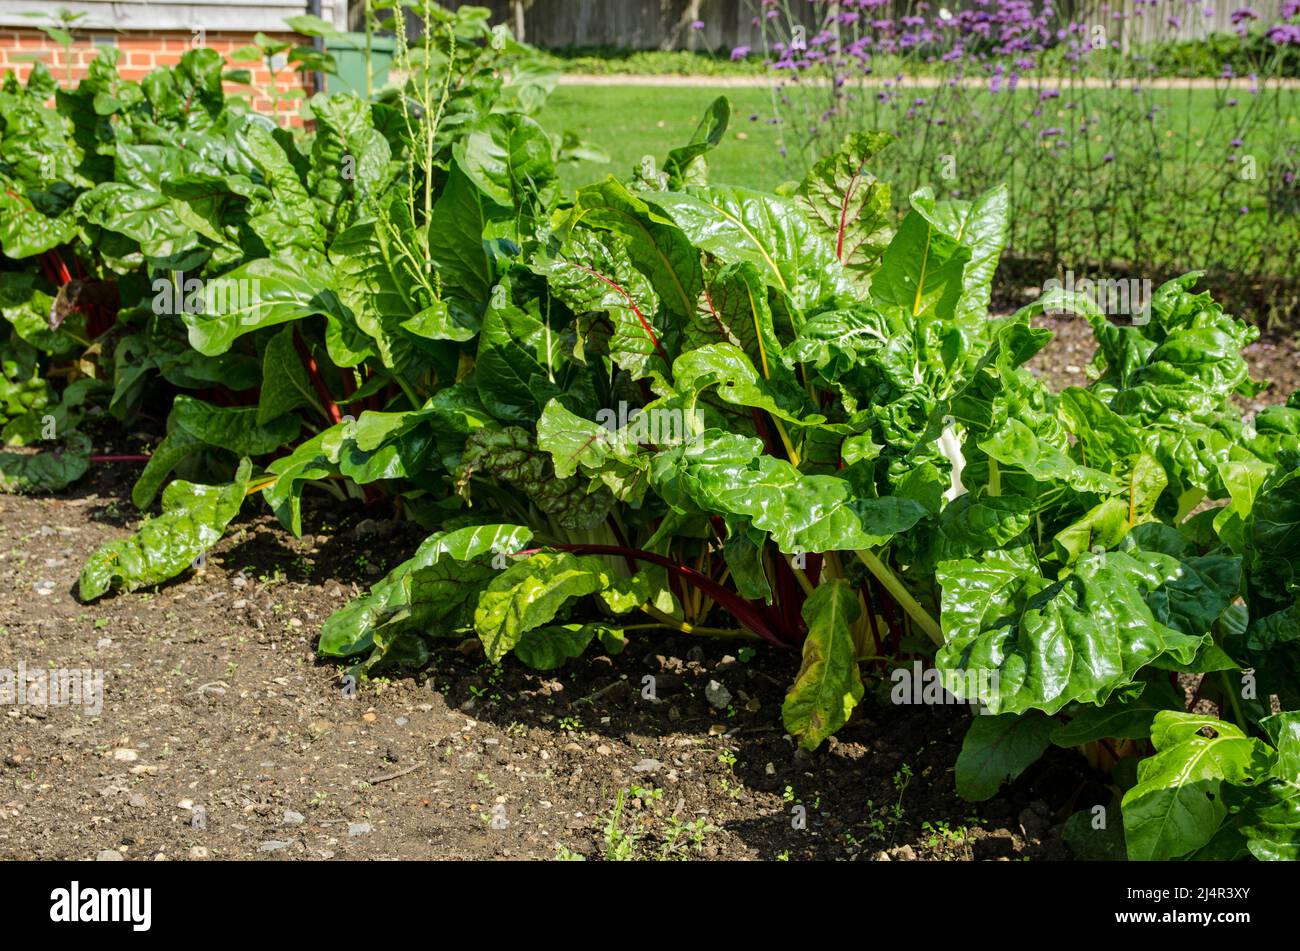 The leafy vegetable ruby chard growing in a vegetable patch in a garden viewed on a sunny day in September. Stock Photo